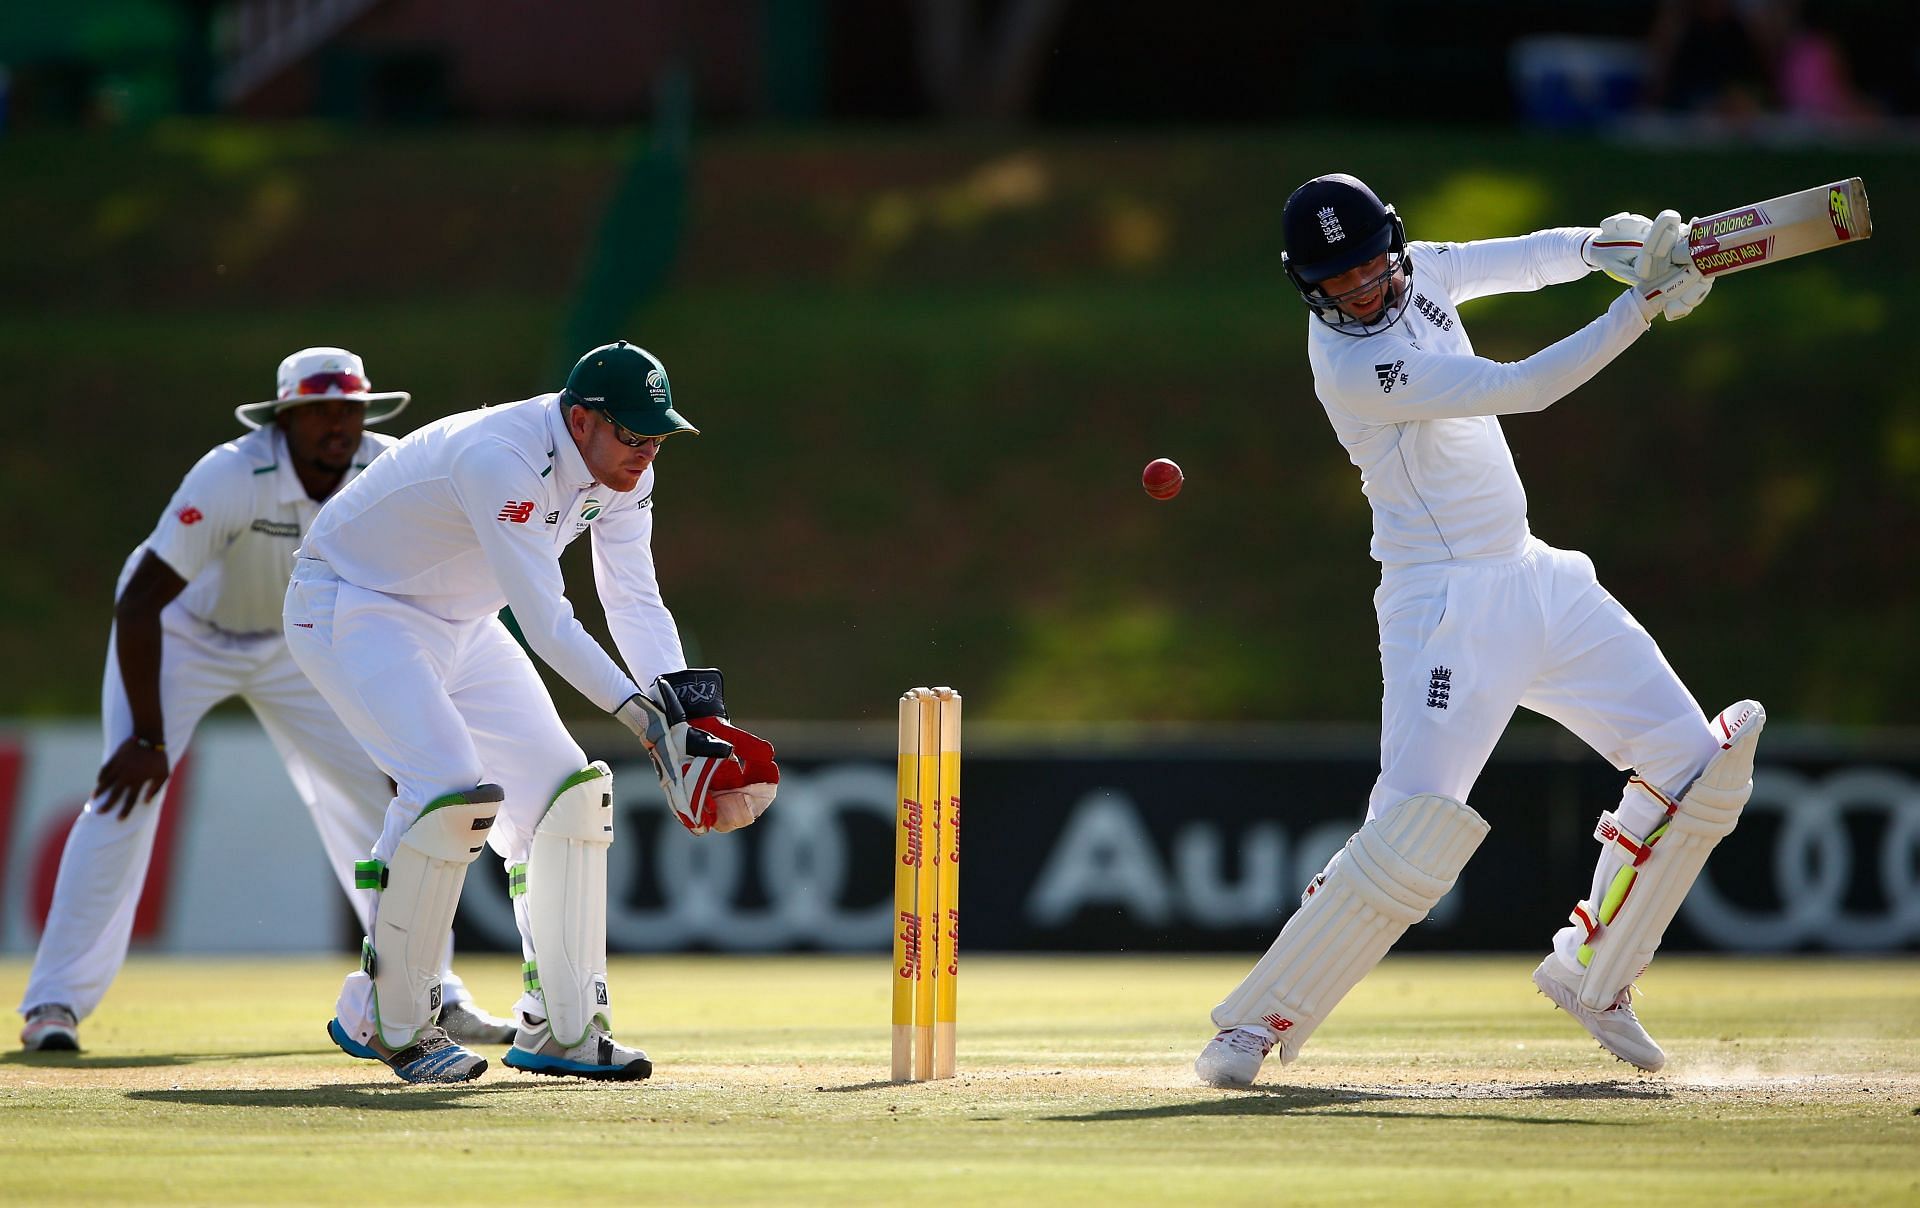 South Africa Invitation XI v England - Tour Match: Day Two